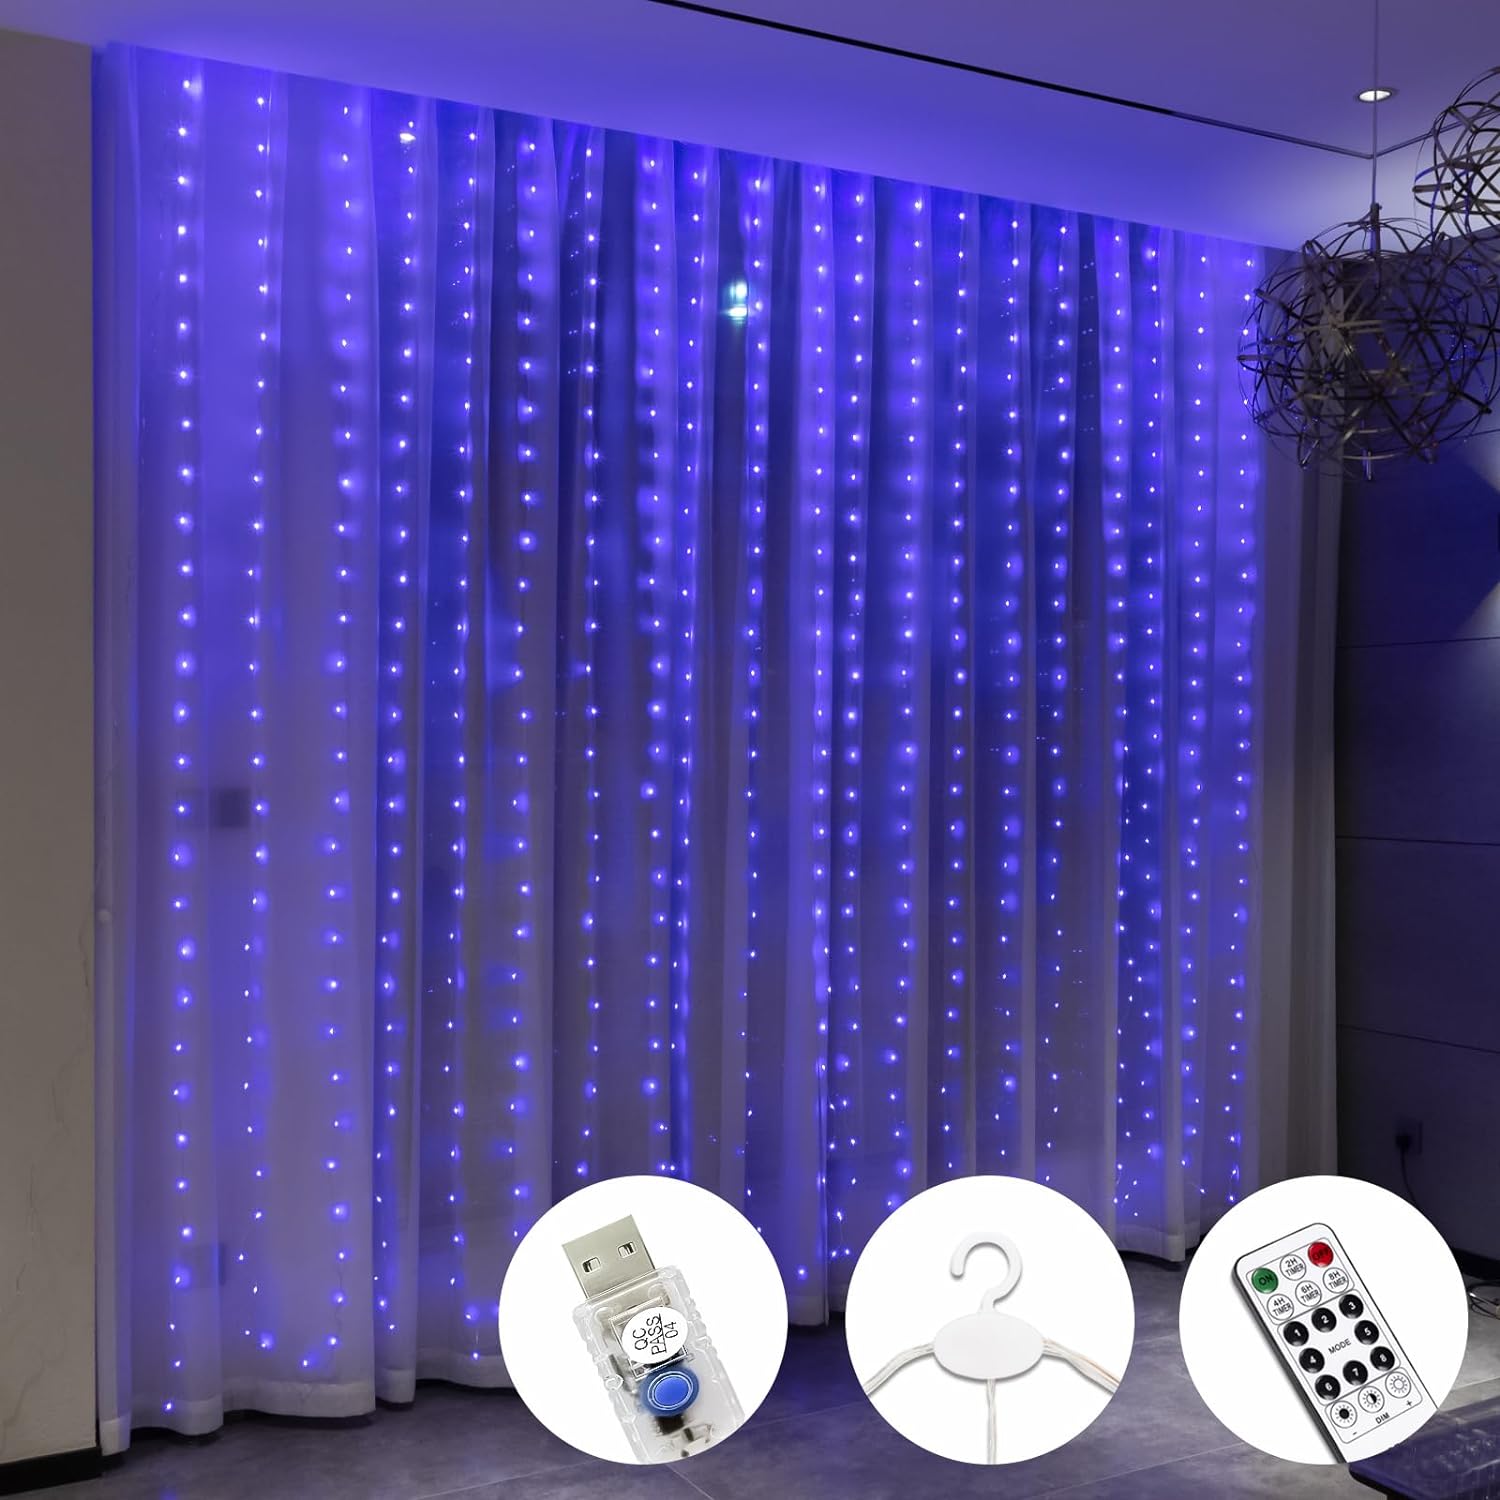 Blue Pixie Curtain Light, 9.8ft x 9.8ft Untangled Copper Wire String Lights, USB Powered Hanging Window Fairy Lights, 8 Lighting Modes, Remote Control for Home Christmas Wedding Party